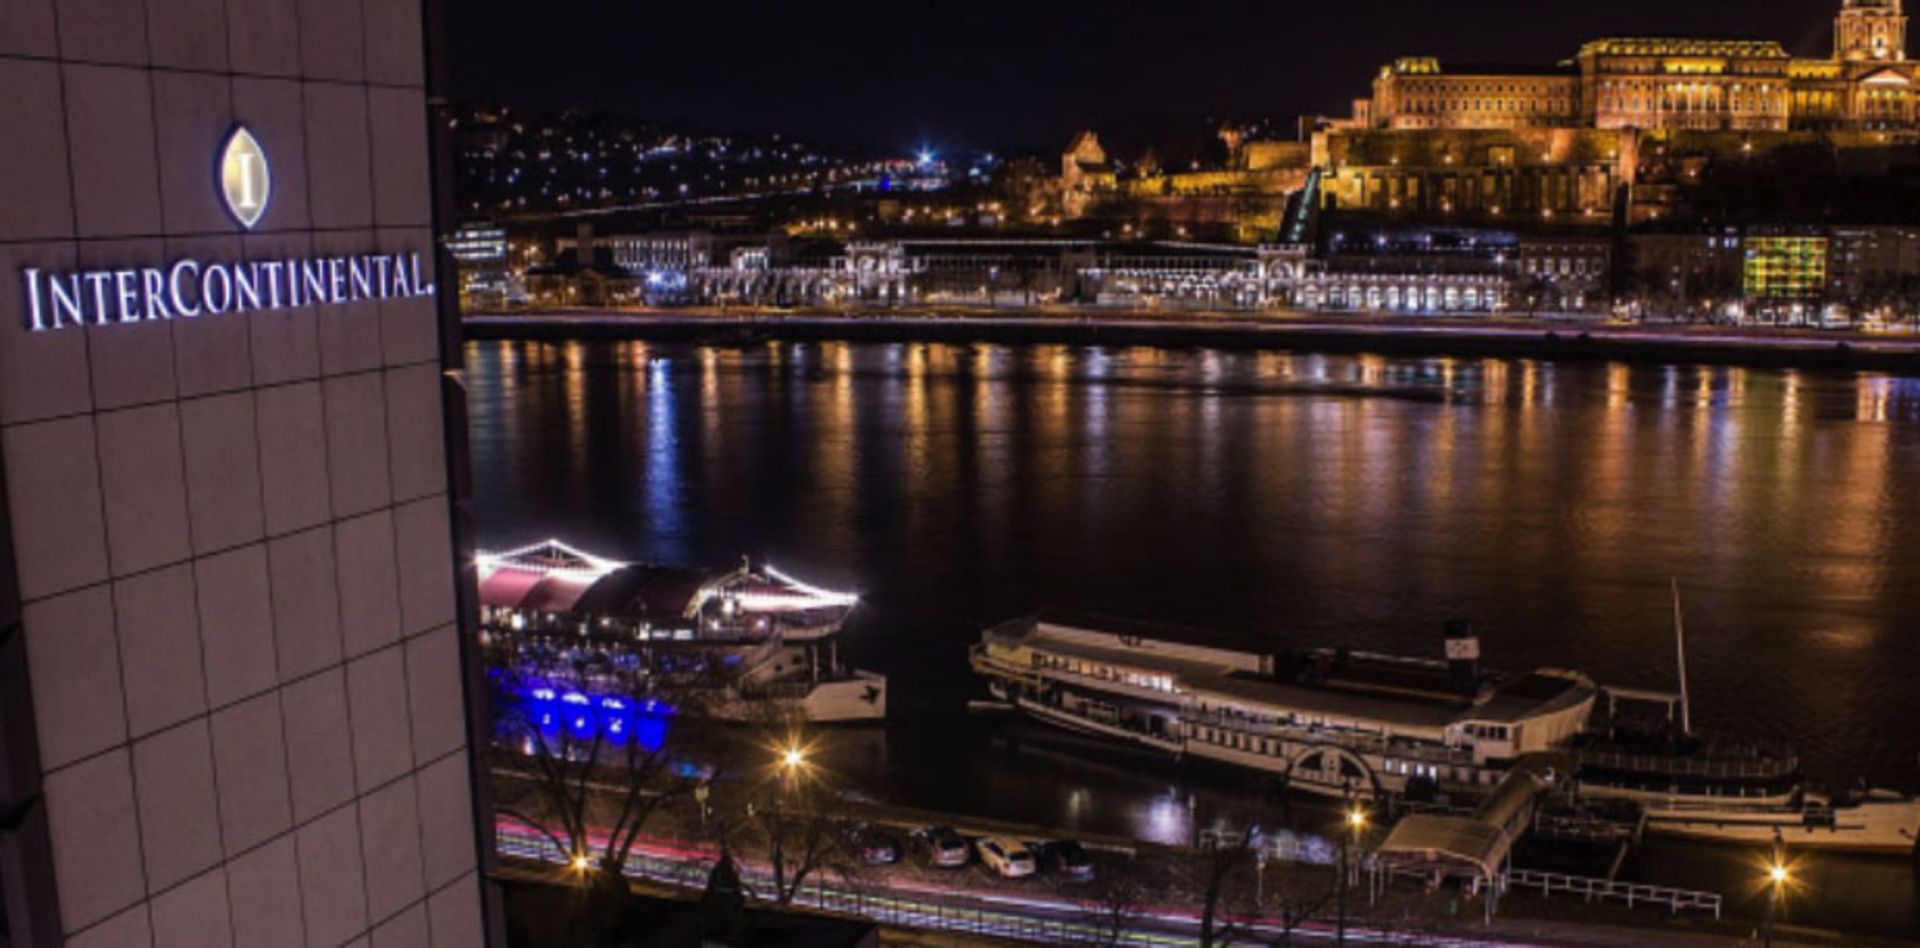 Two nights in Budapest staying at the 5* InterContinental Hotel. Located next to the Chain Bridge